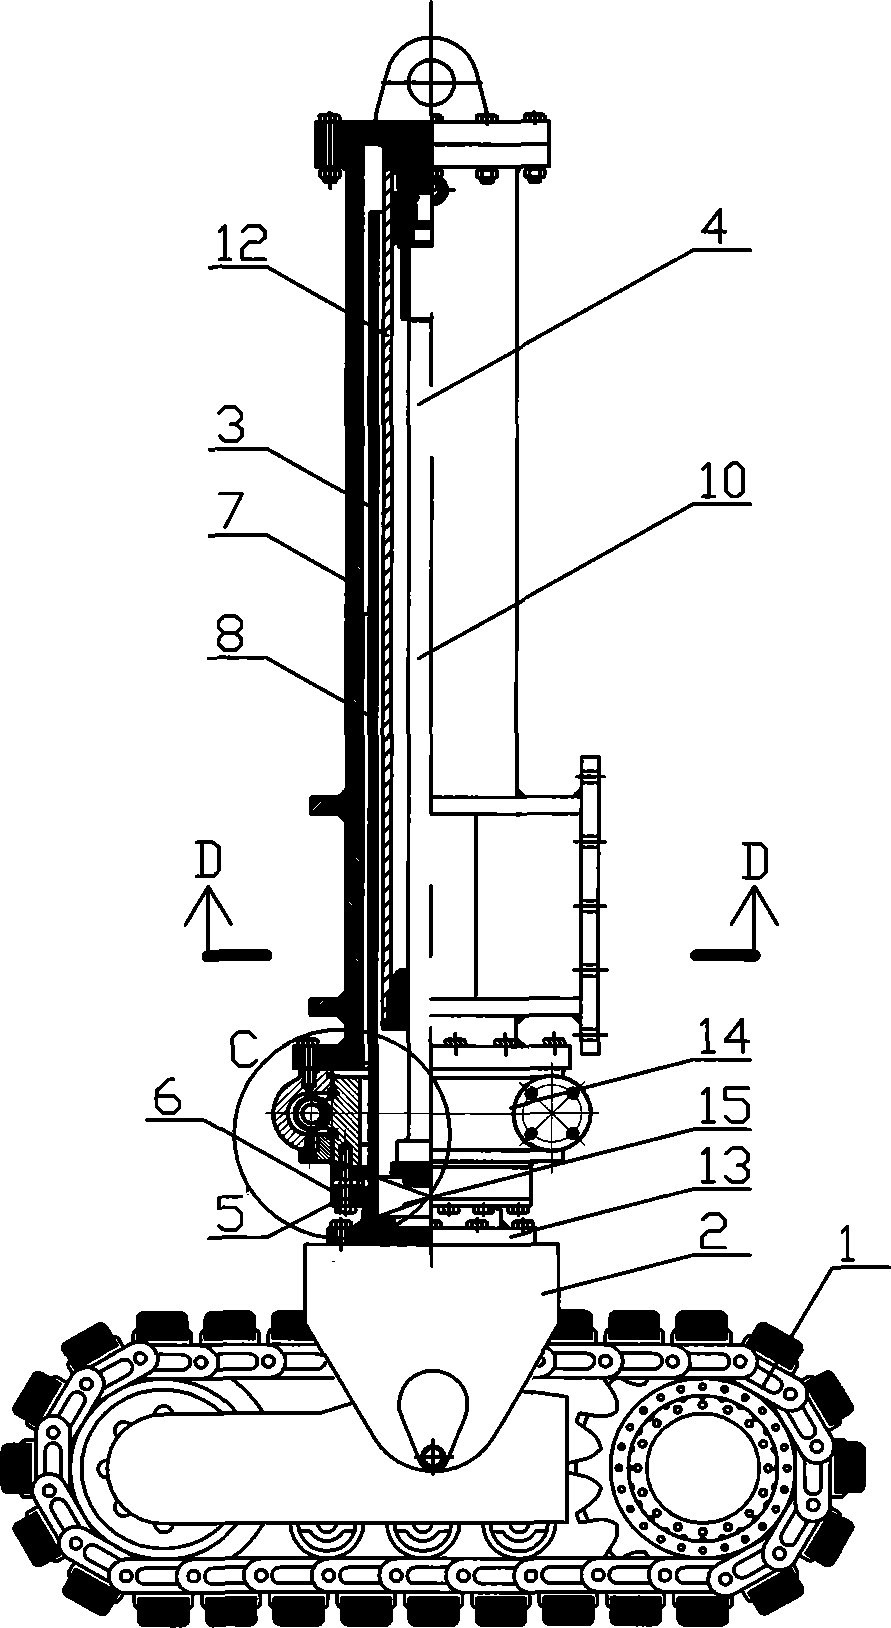 Advancement support device for spreading machine